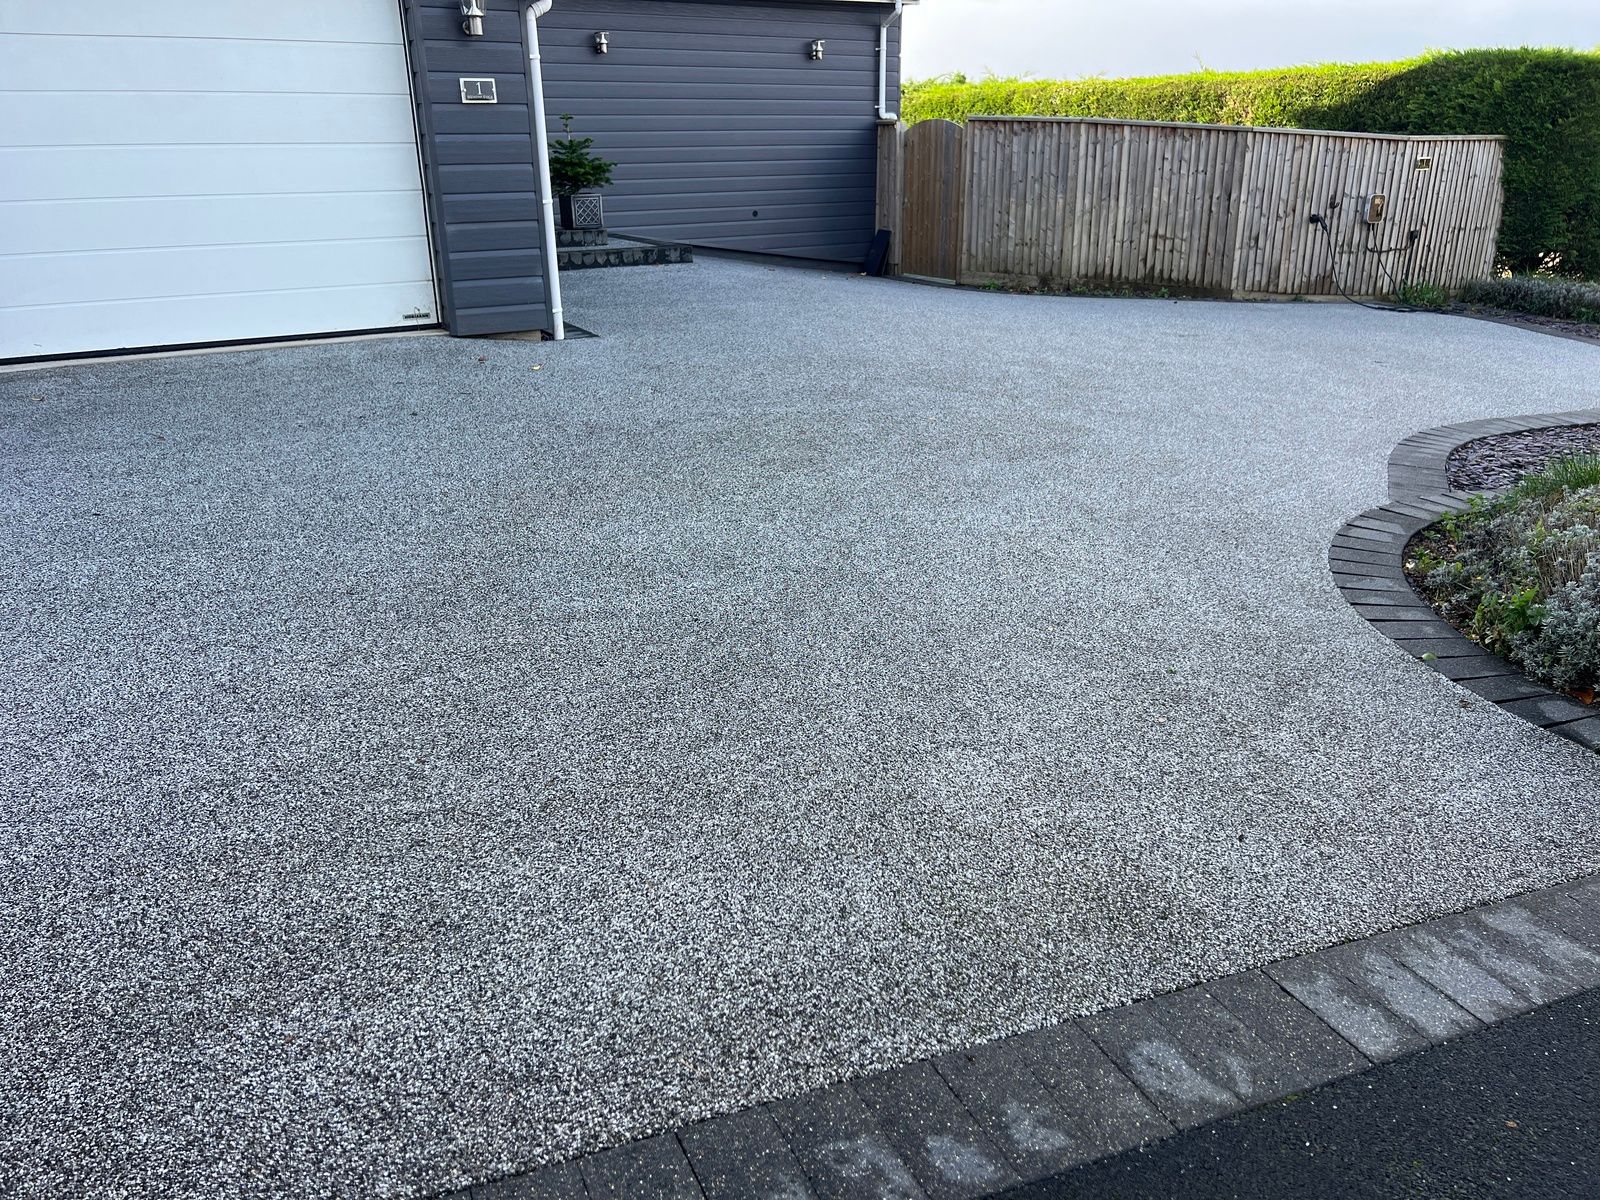 Grey resin driveway, with grey block paving outside a grey home with a garage.